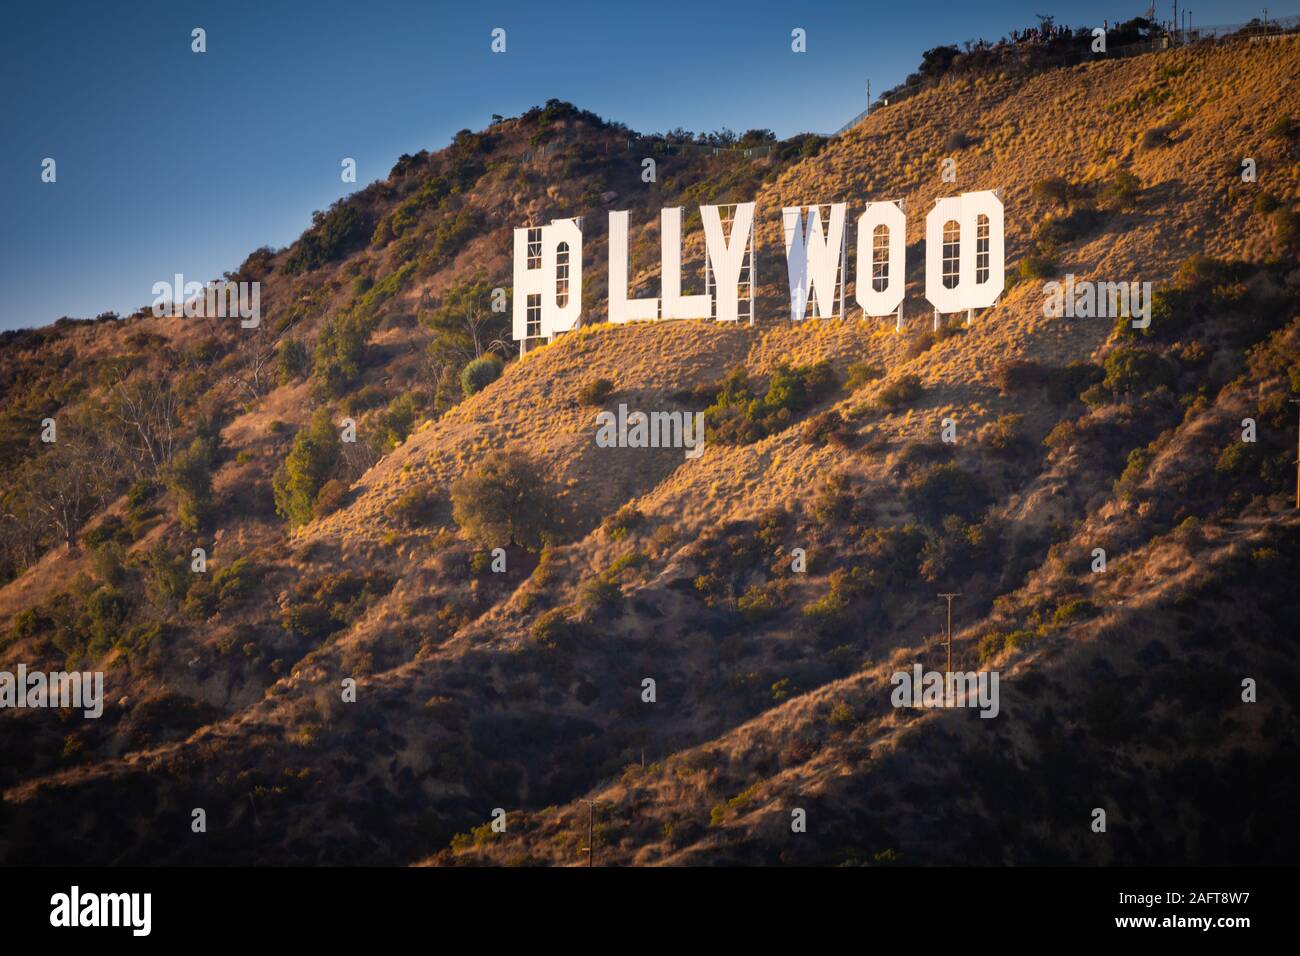 The Hollywood Sign (formerly the Hollywoodland Sign) is an American landmark and cultural icon overlooking Hollywood, Los Angeles, California. Stock Photo